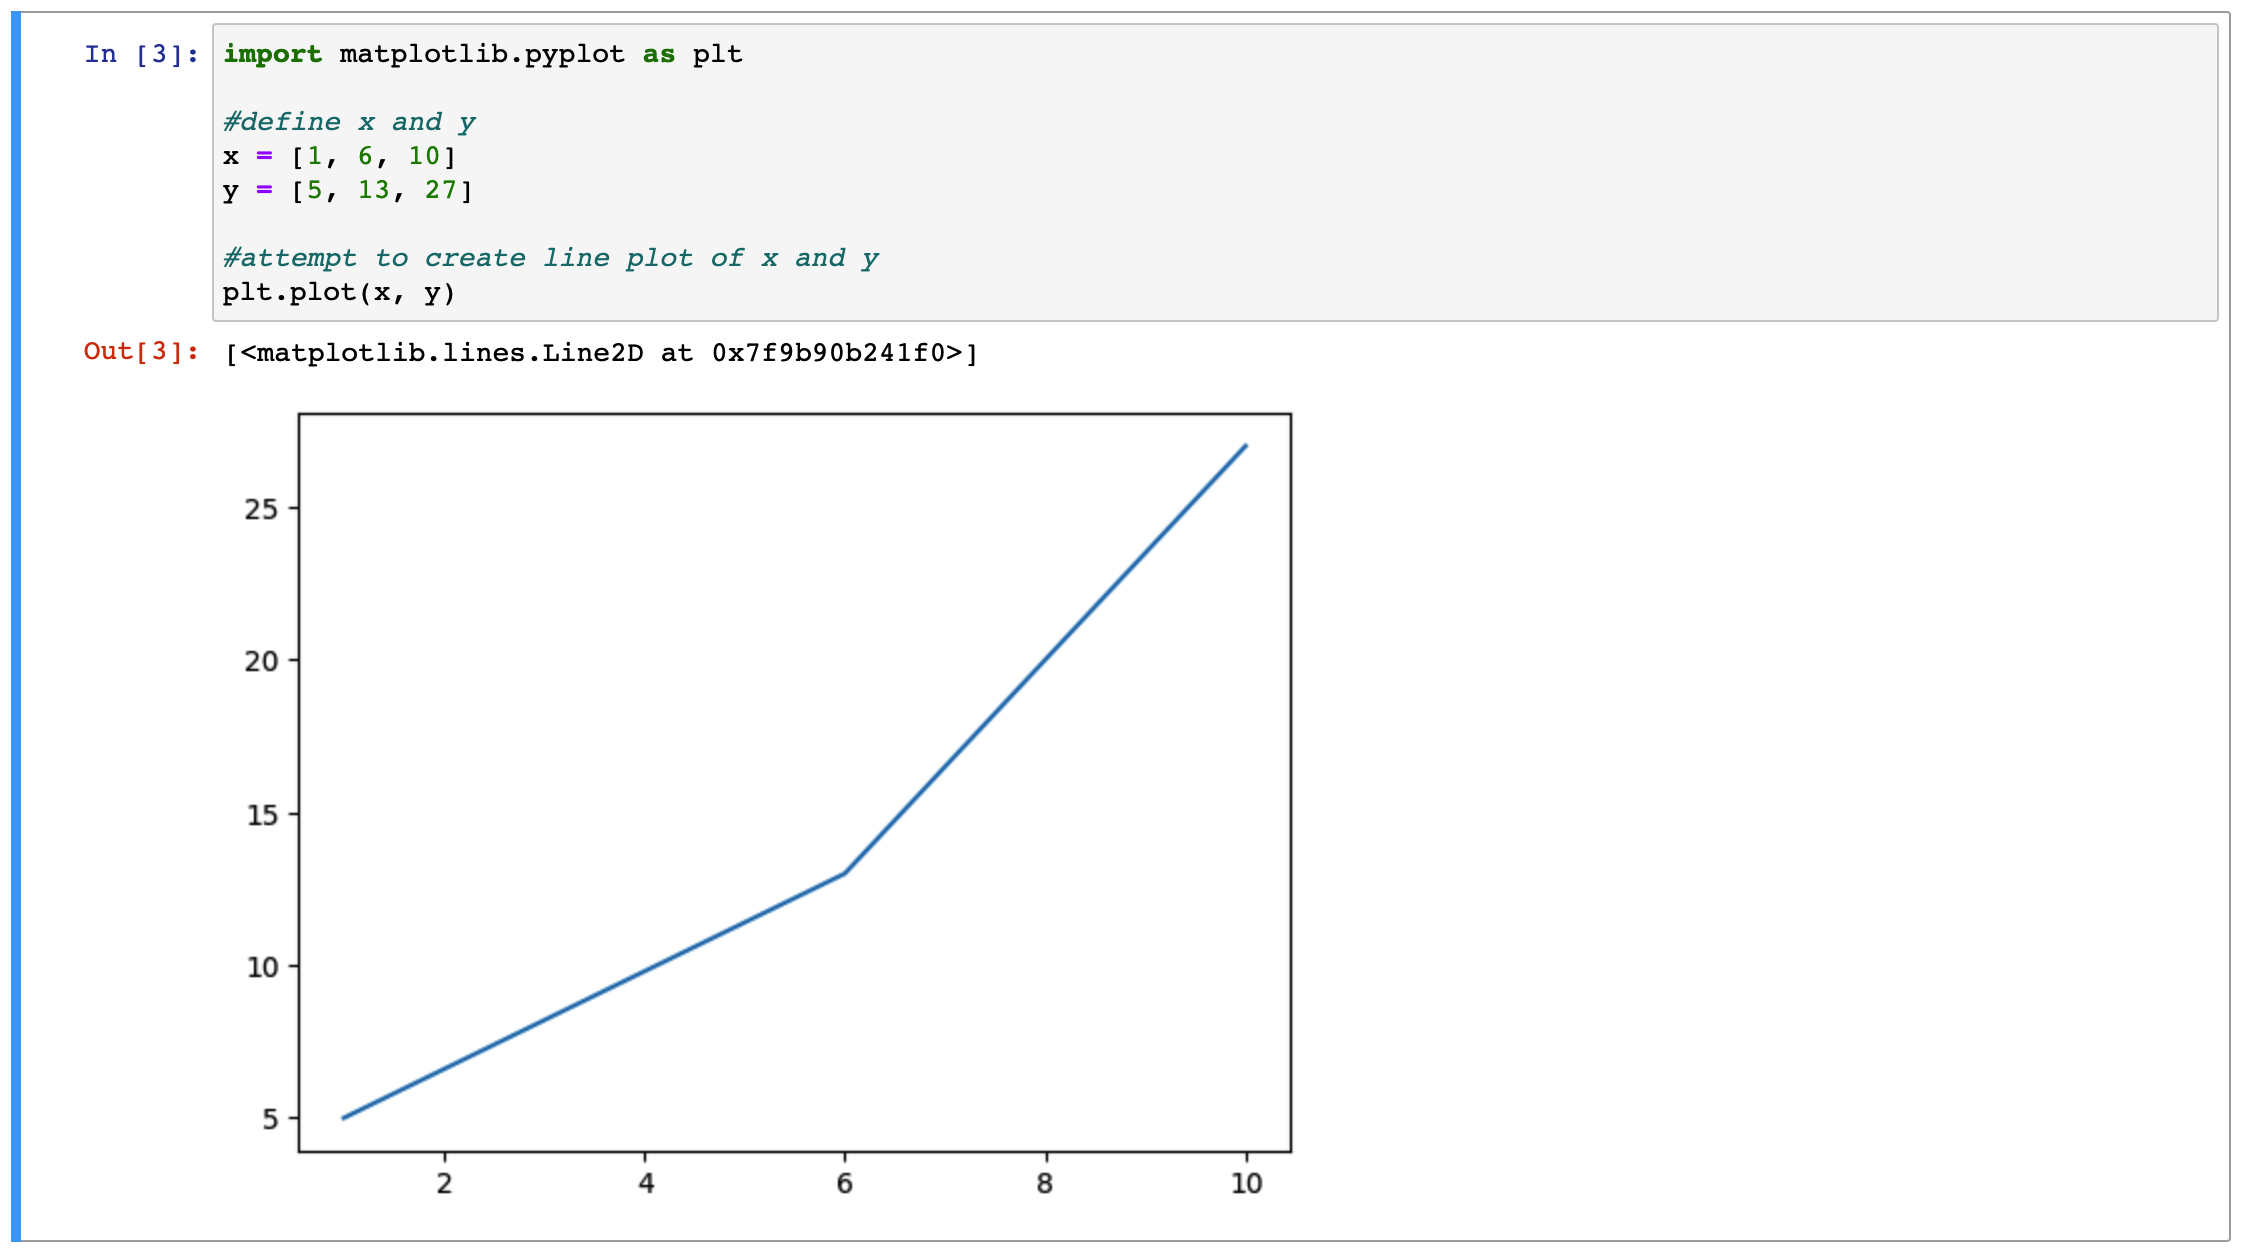 Jupyter Notebook Tutorial: A Comprehensive Guide for Data Scientists